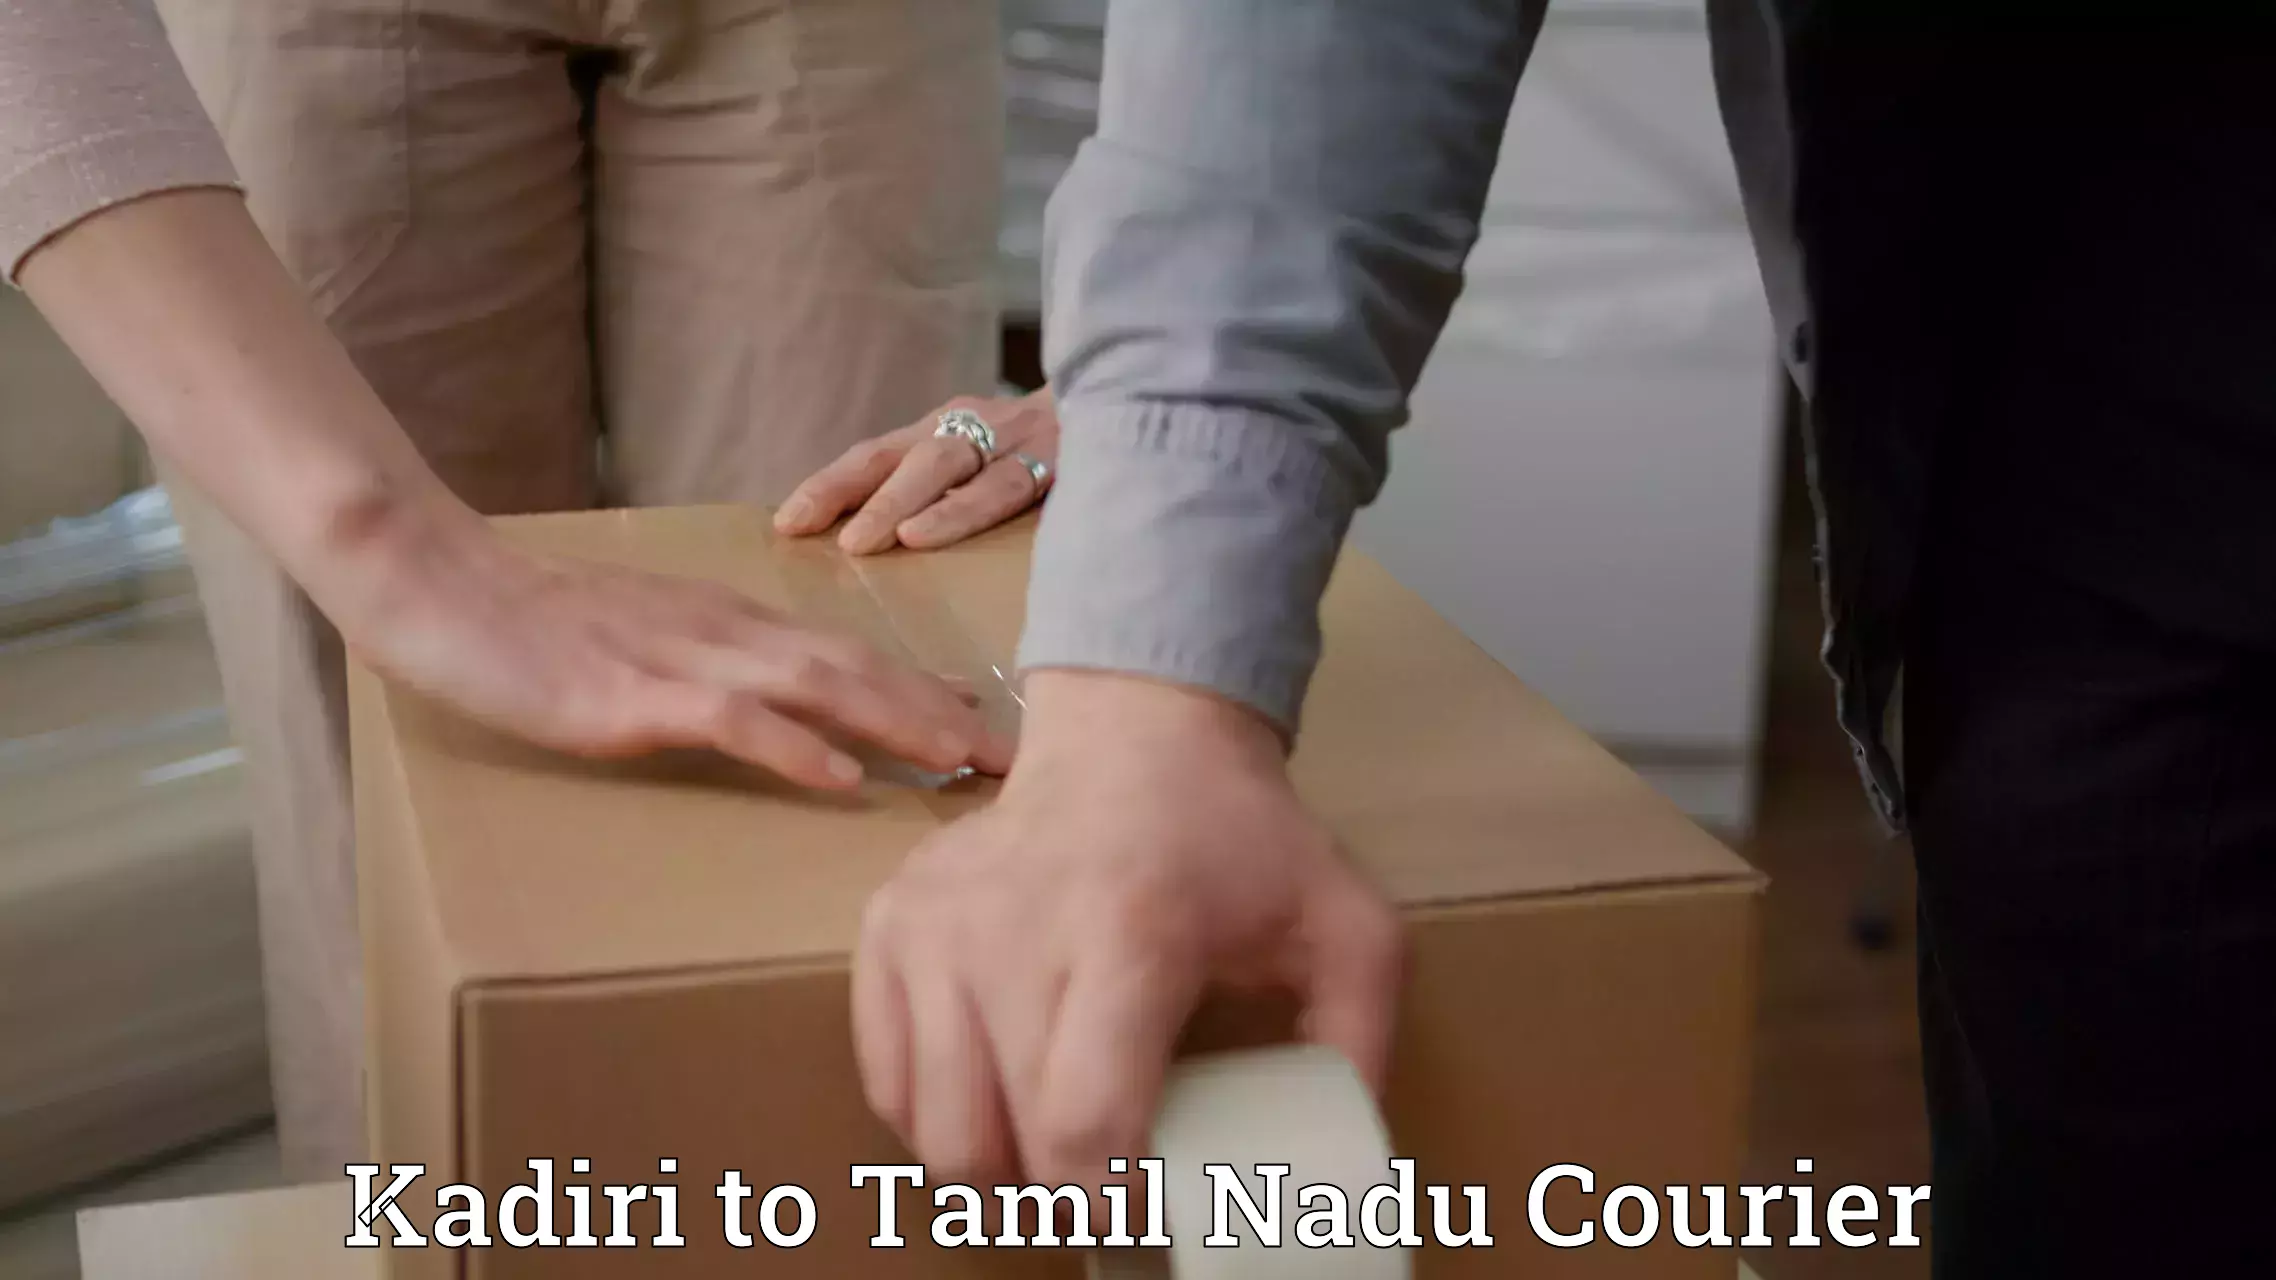 Next-day delivery options Kadiri to Erode